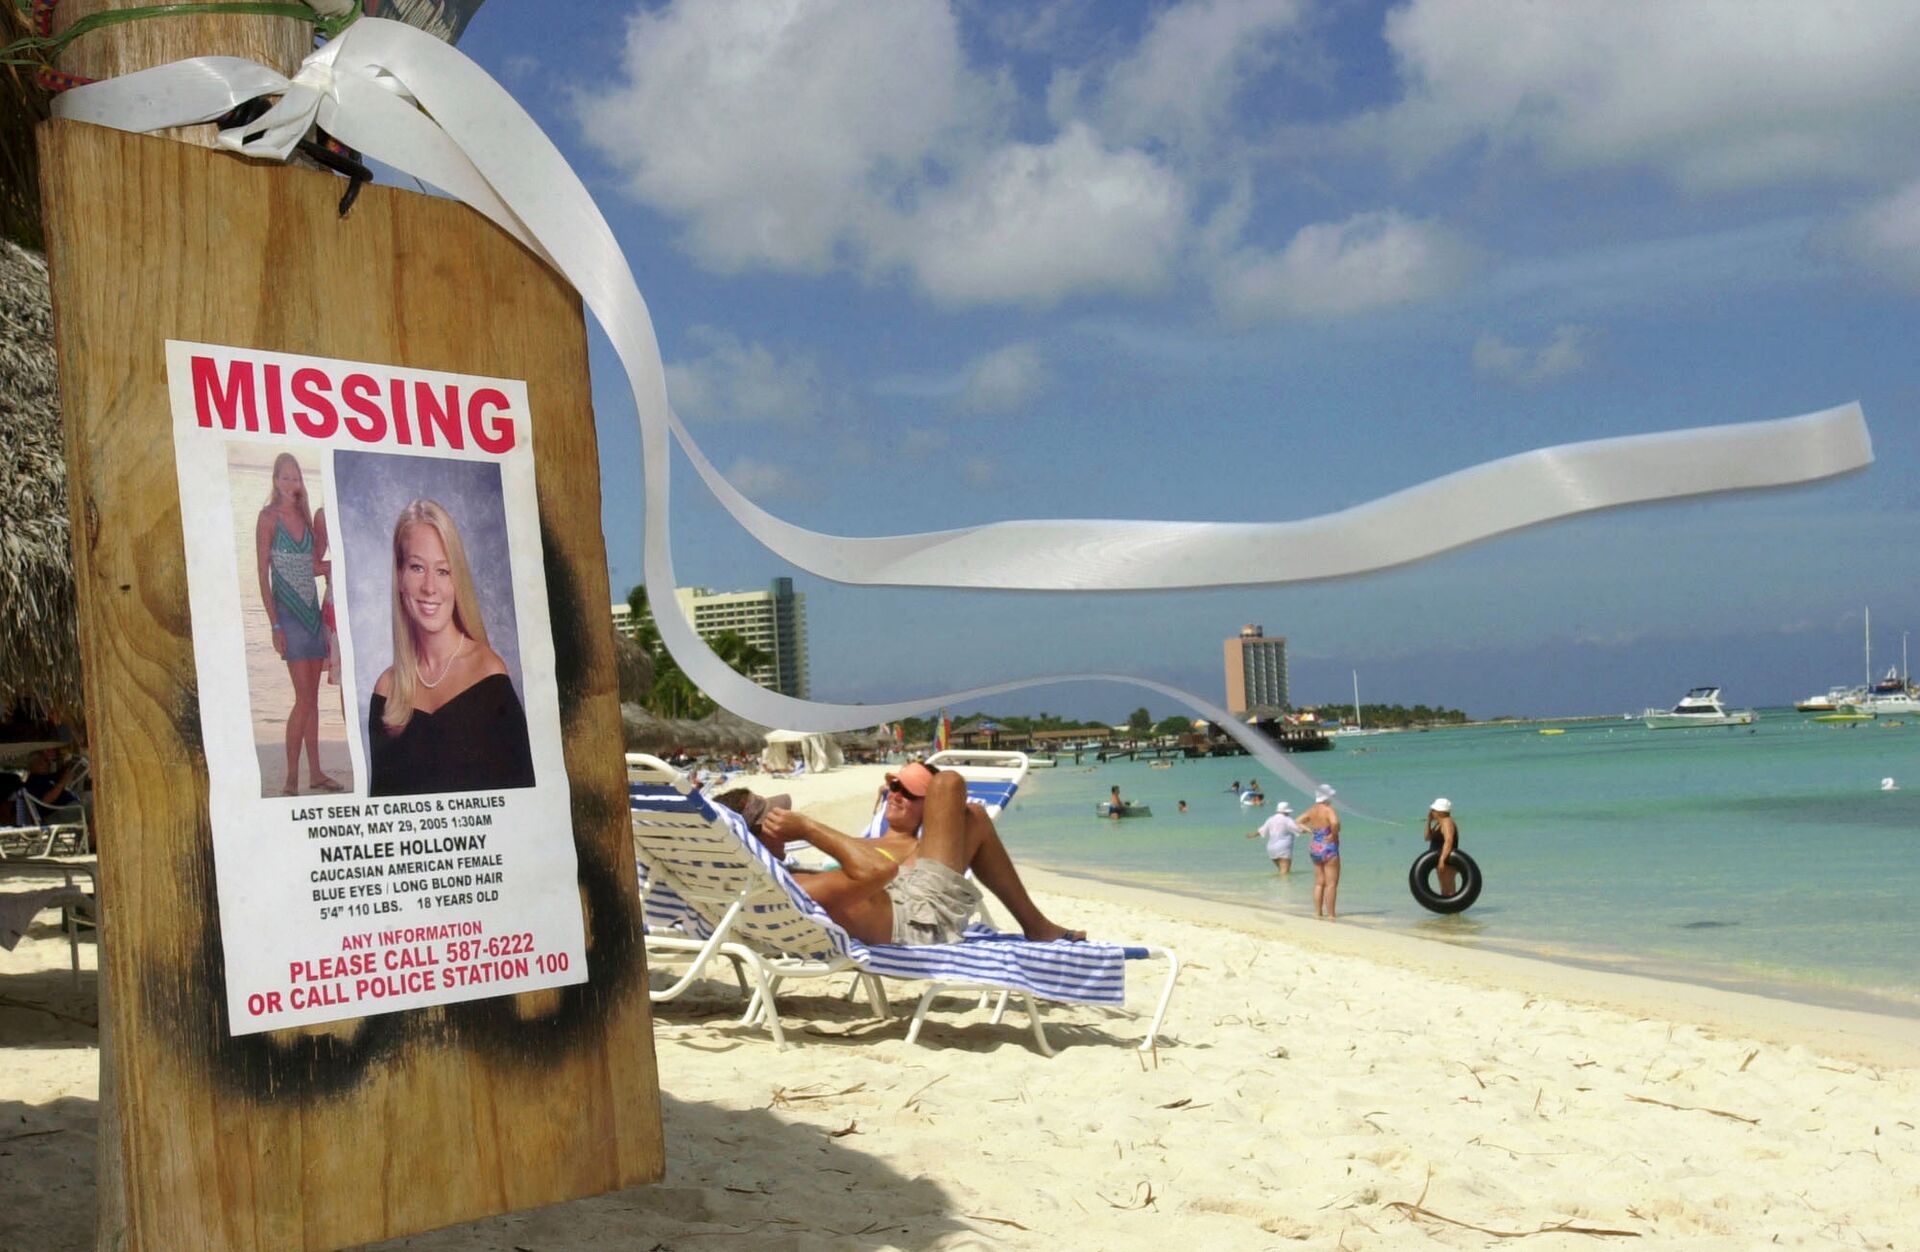 This June 10, 2005 file photo shows a missing poster for Natalee Holloway, a high school graduate of Mountain Brook, Alabama who disappeared while on a graduation trip to Aruba on May 30, 2005, on Palm Beach where tourists sunbathe in Aruba. - Sputnik International, 1920, 07.09.2021